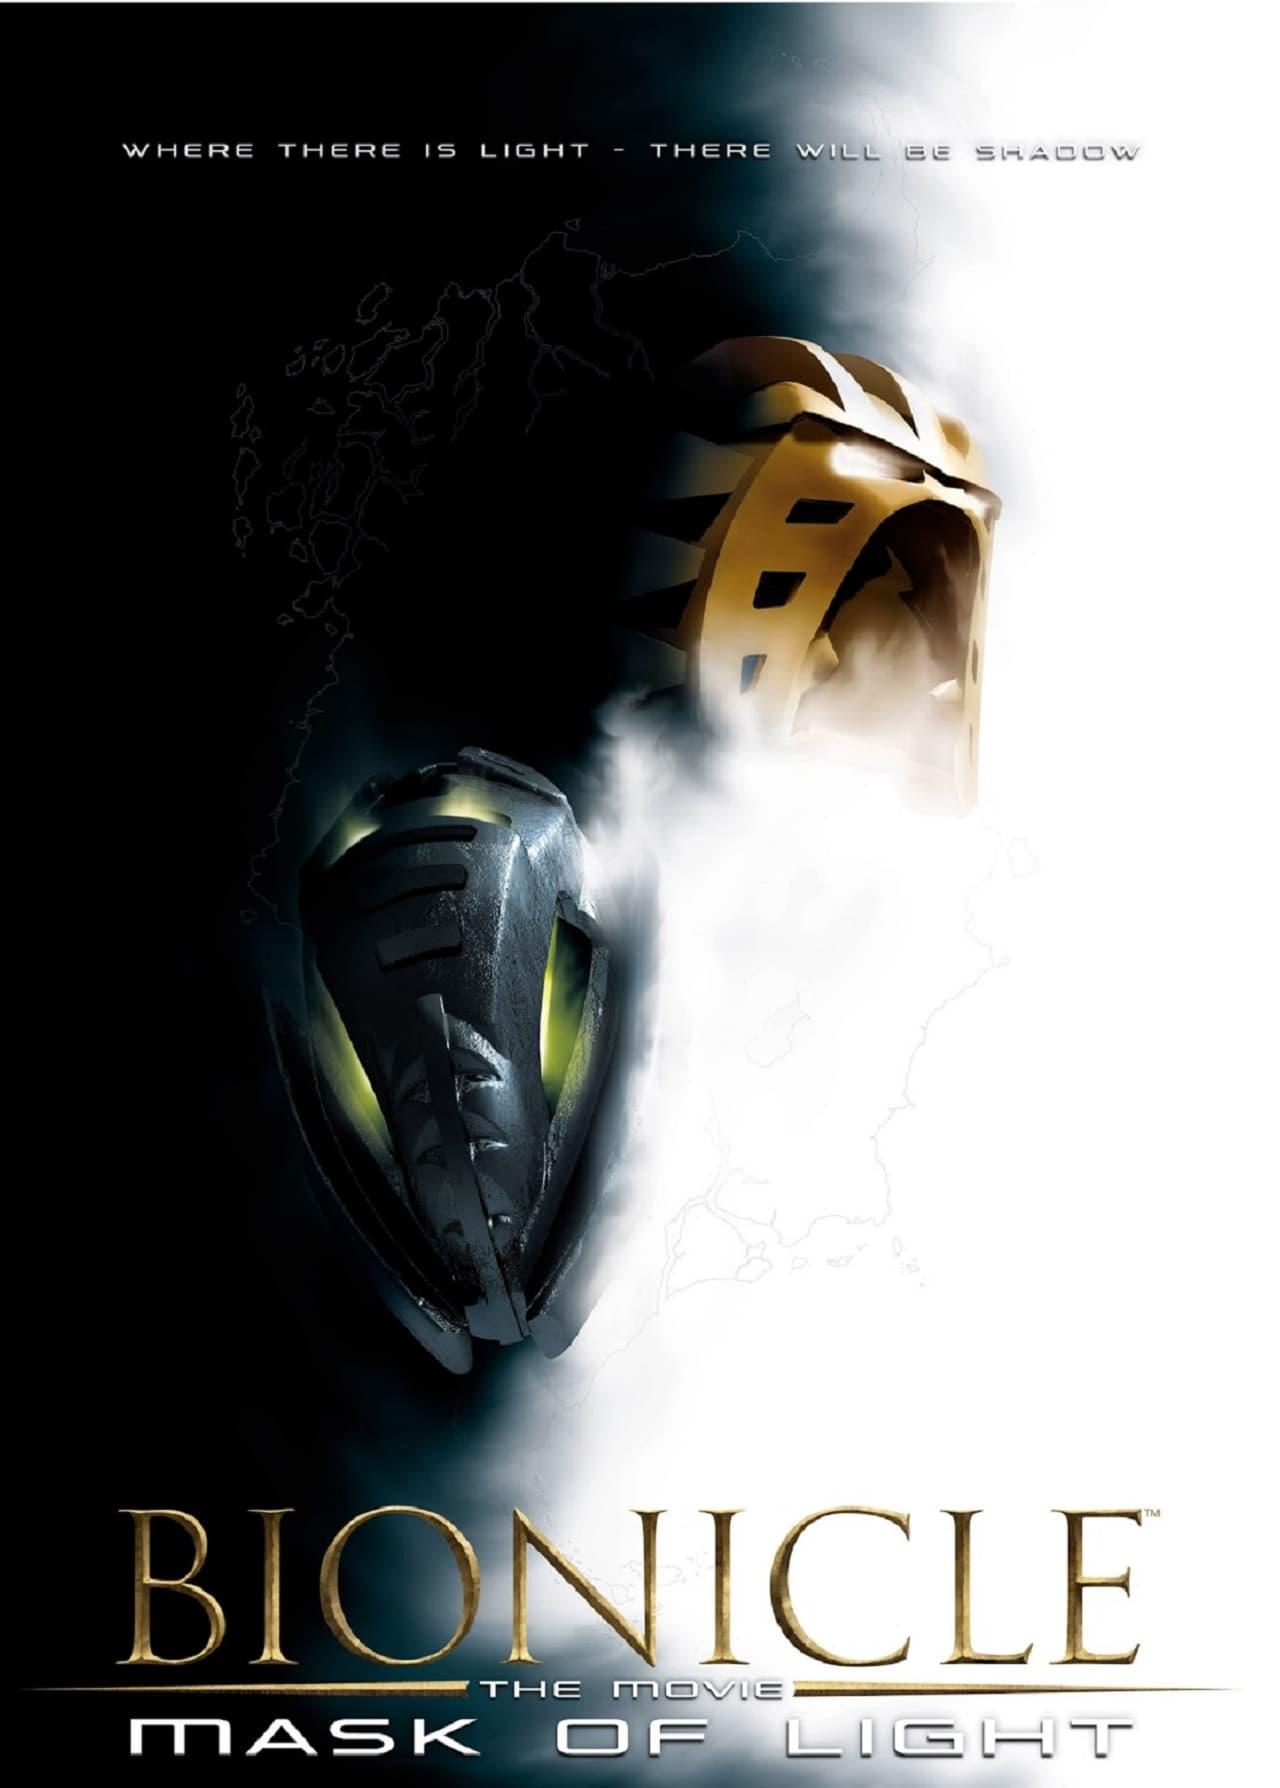 Bionicle: Mask of Light poster